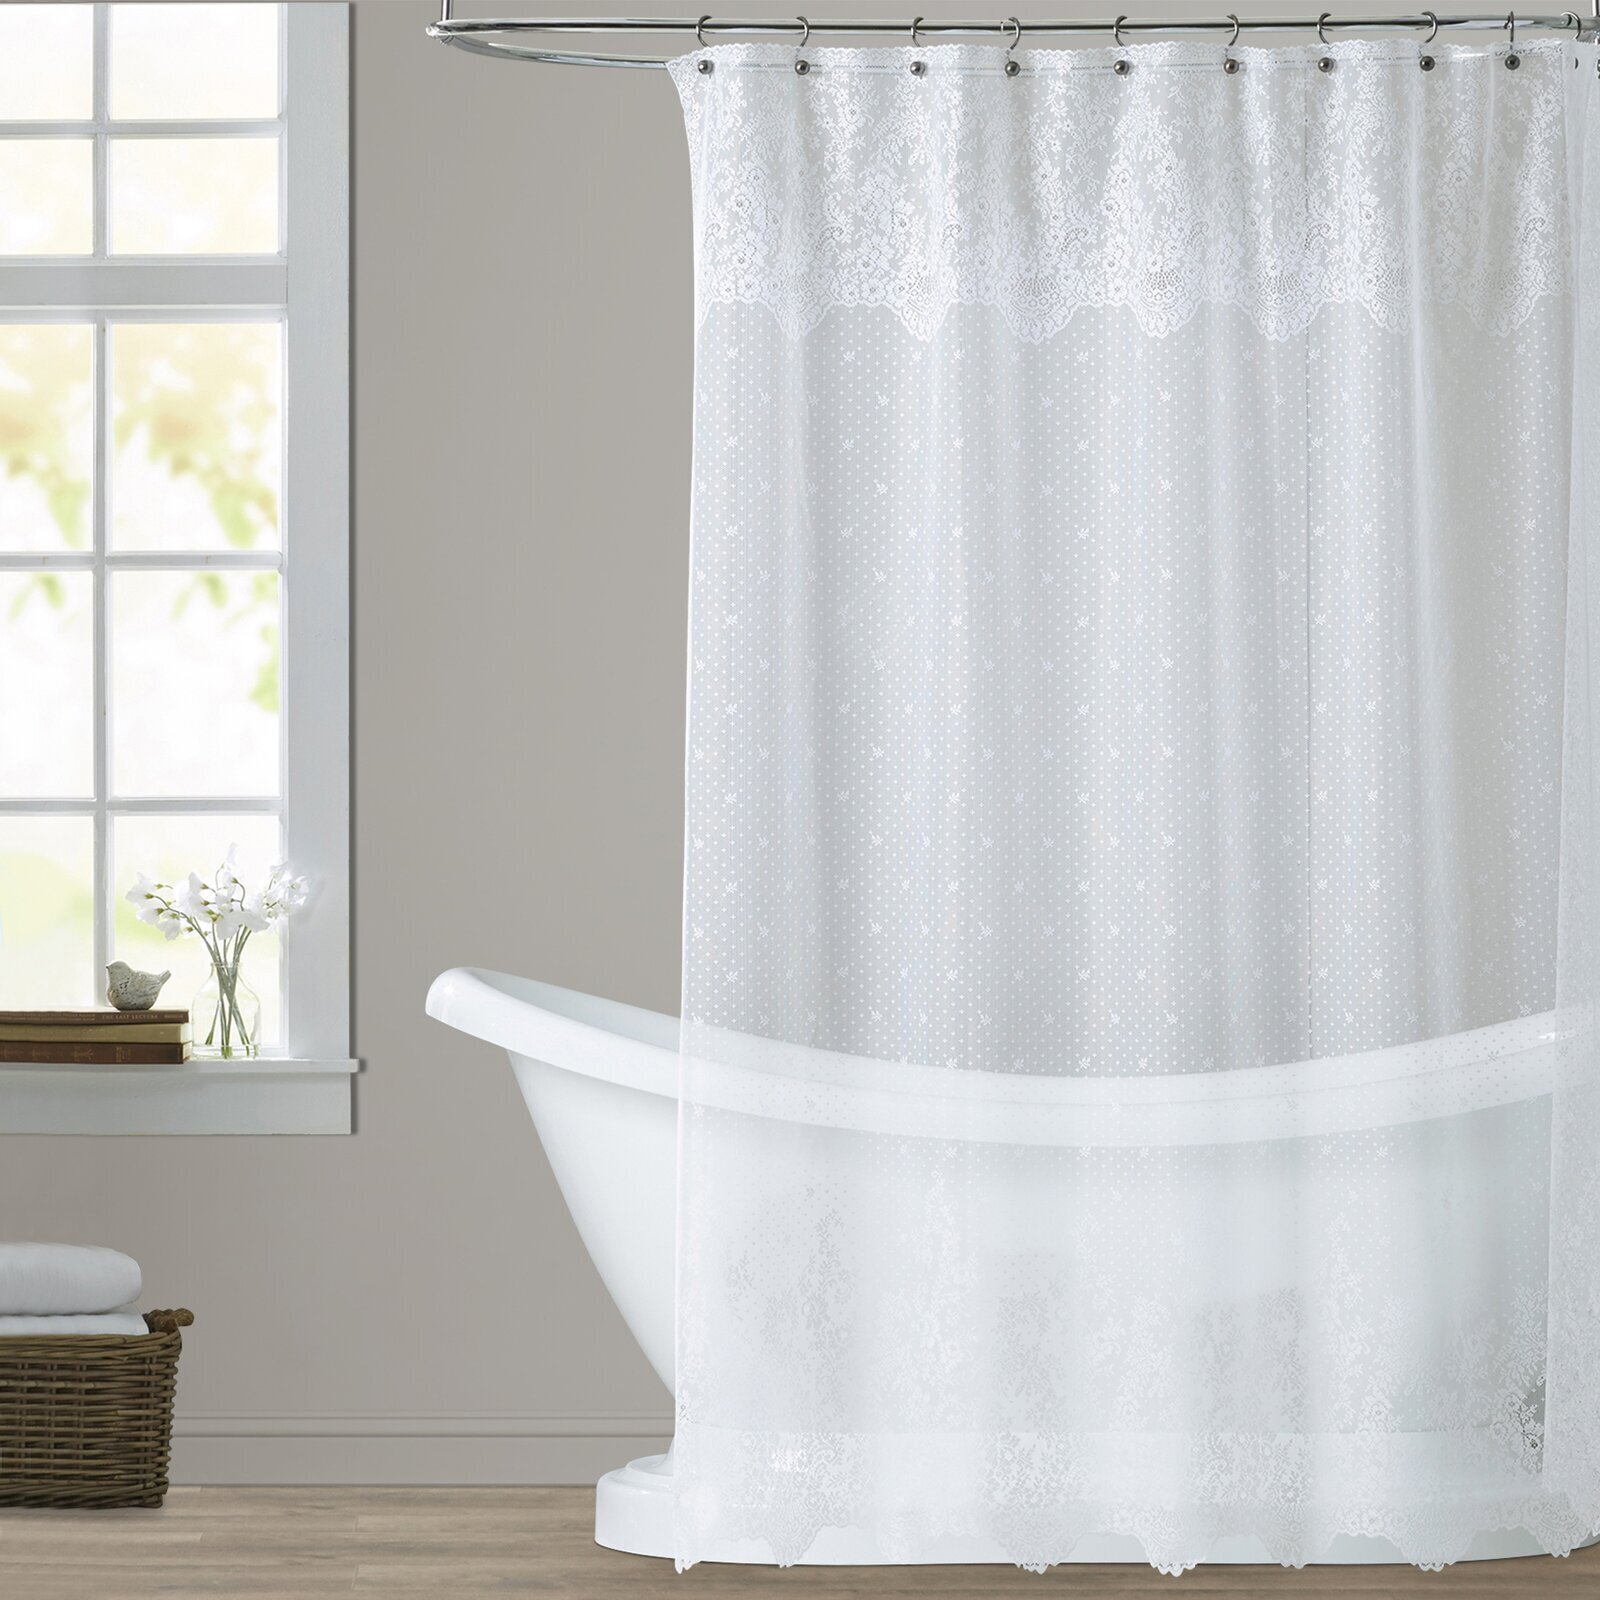 Floral And Polka Dot Lace Shower Curtain